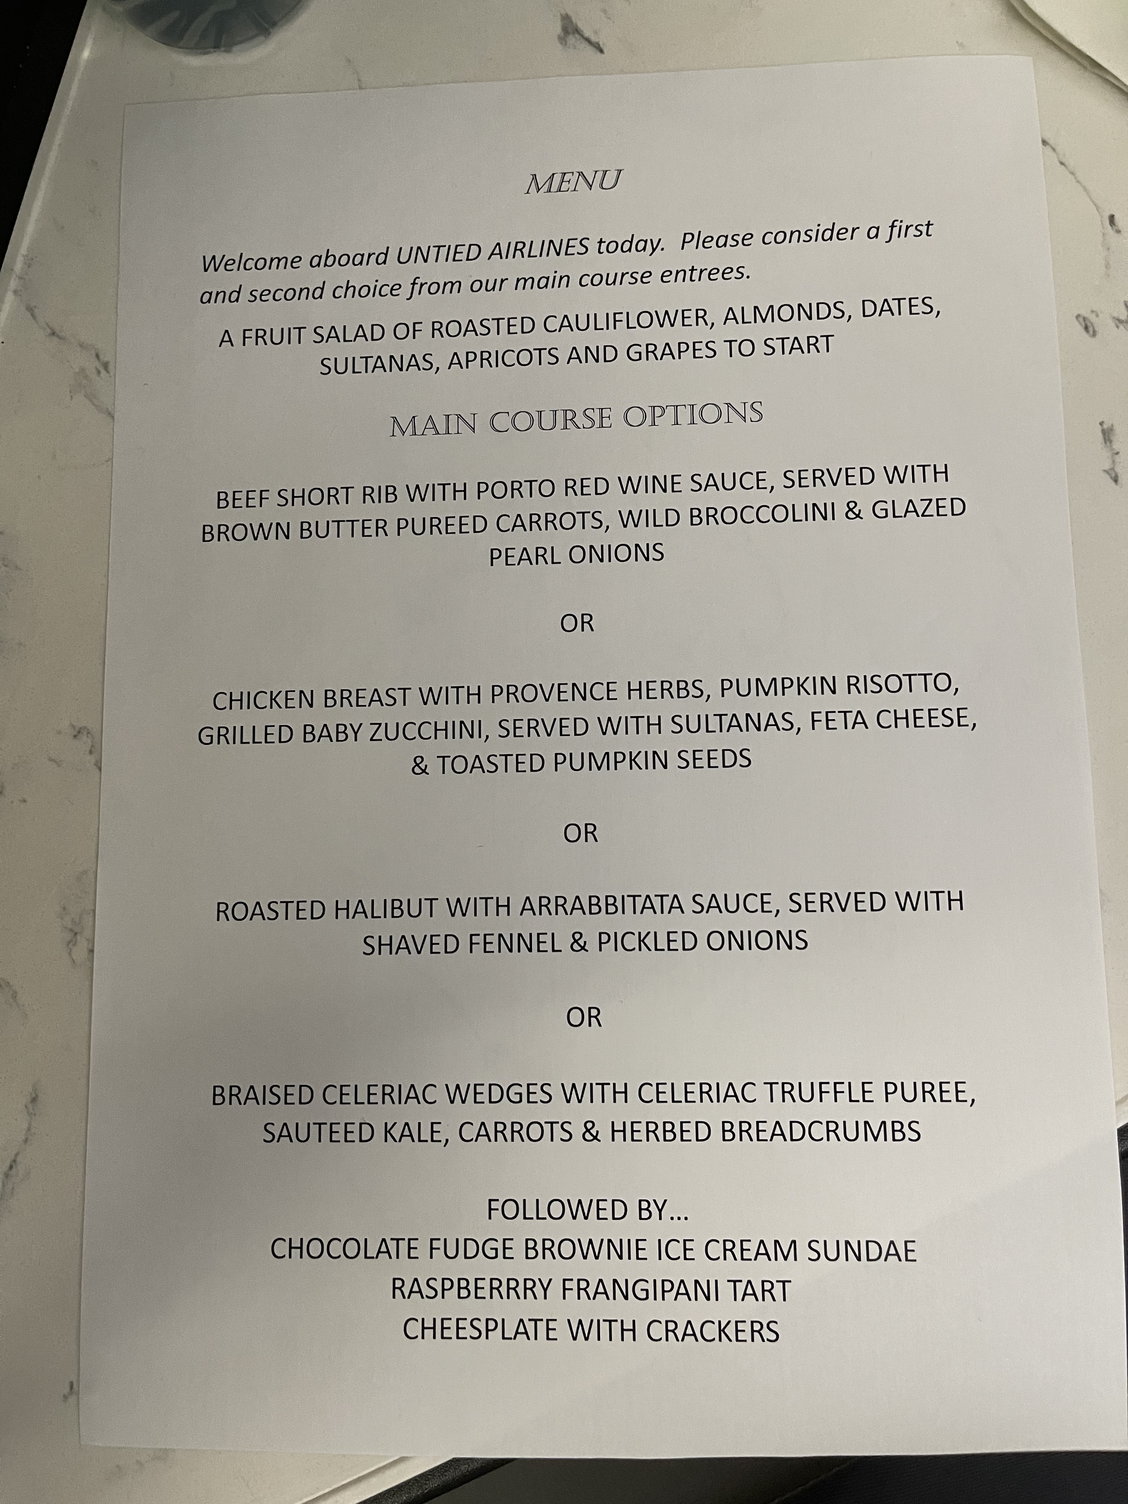 United Airlines Business Class Menu Typo Is Delicious Irony » TrueViralNews